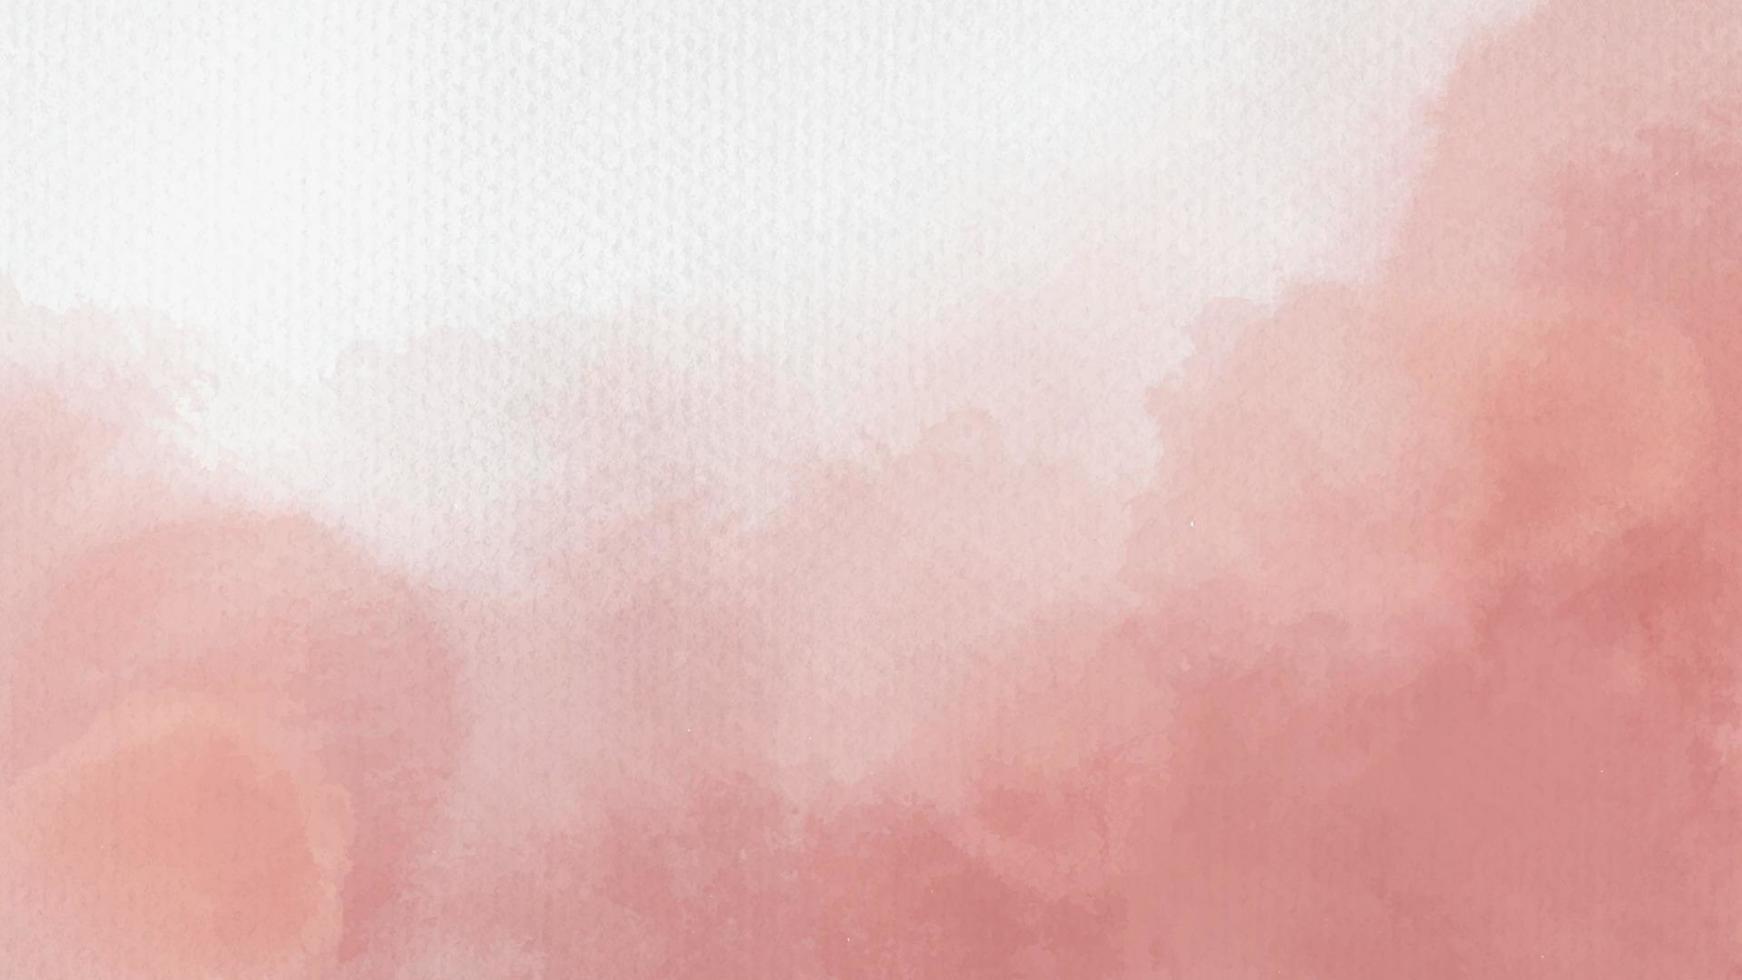 Hand painted pink and white color with watercolor texture vector